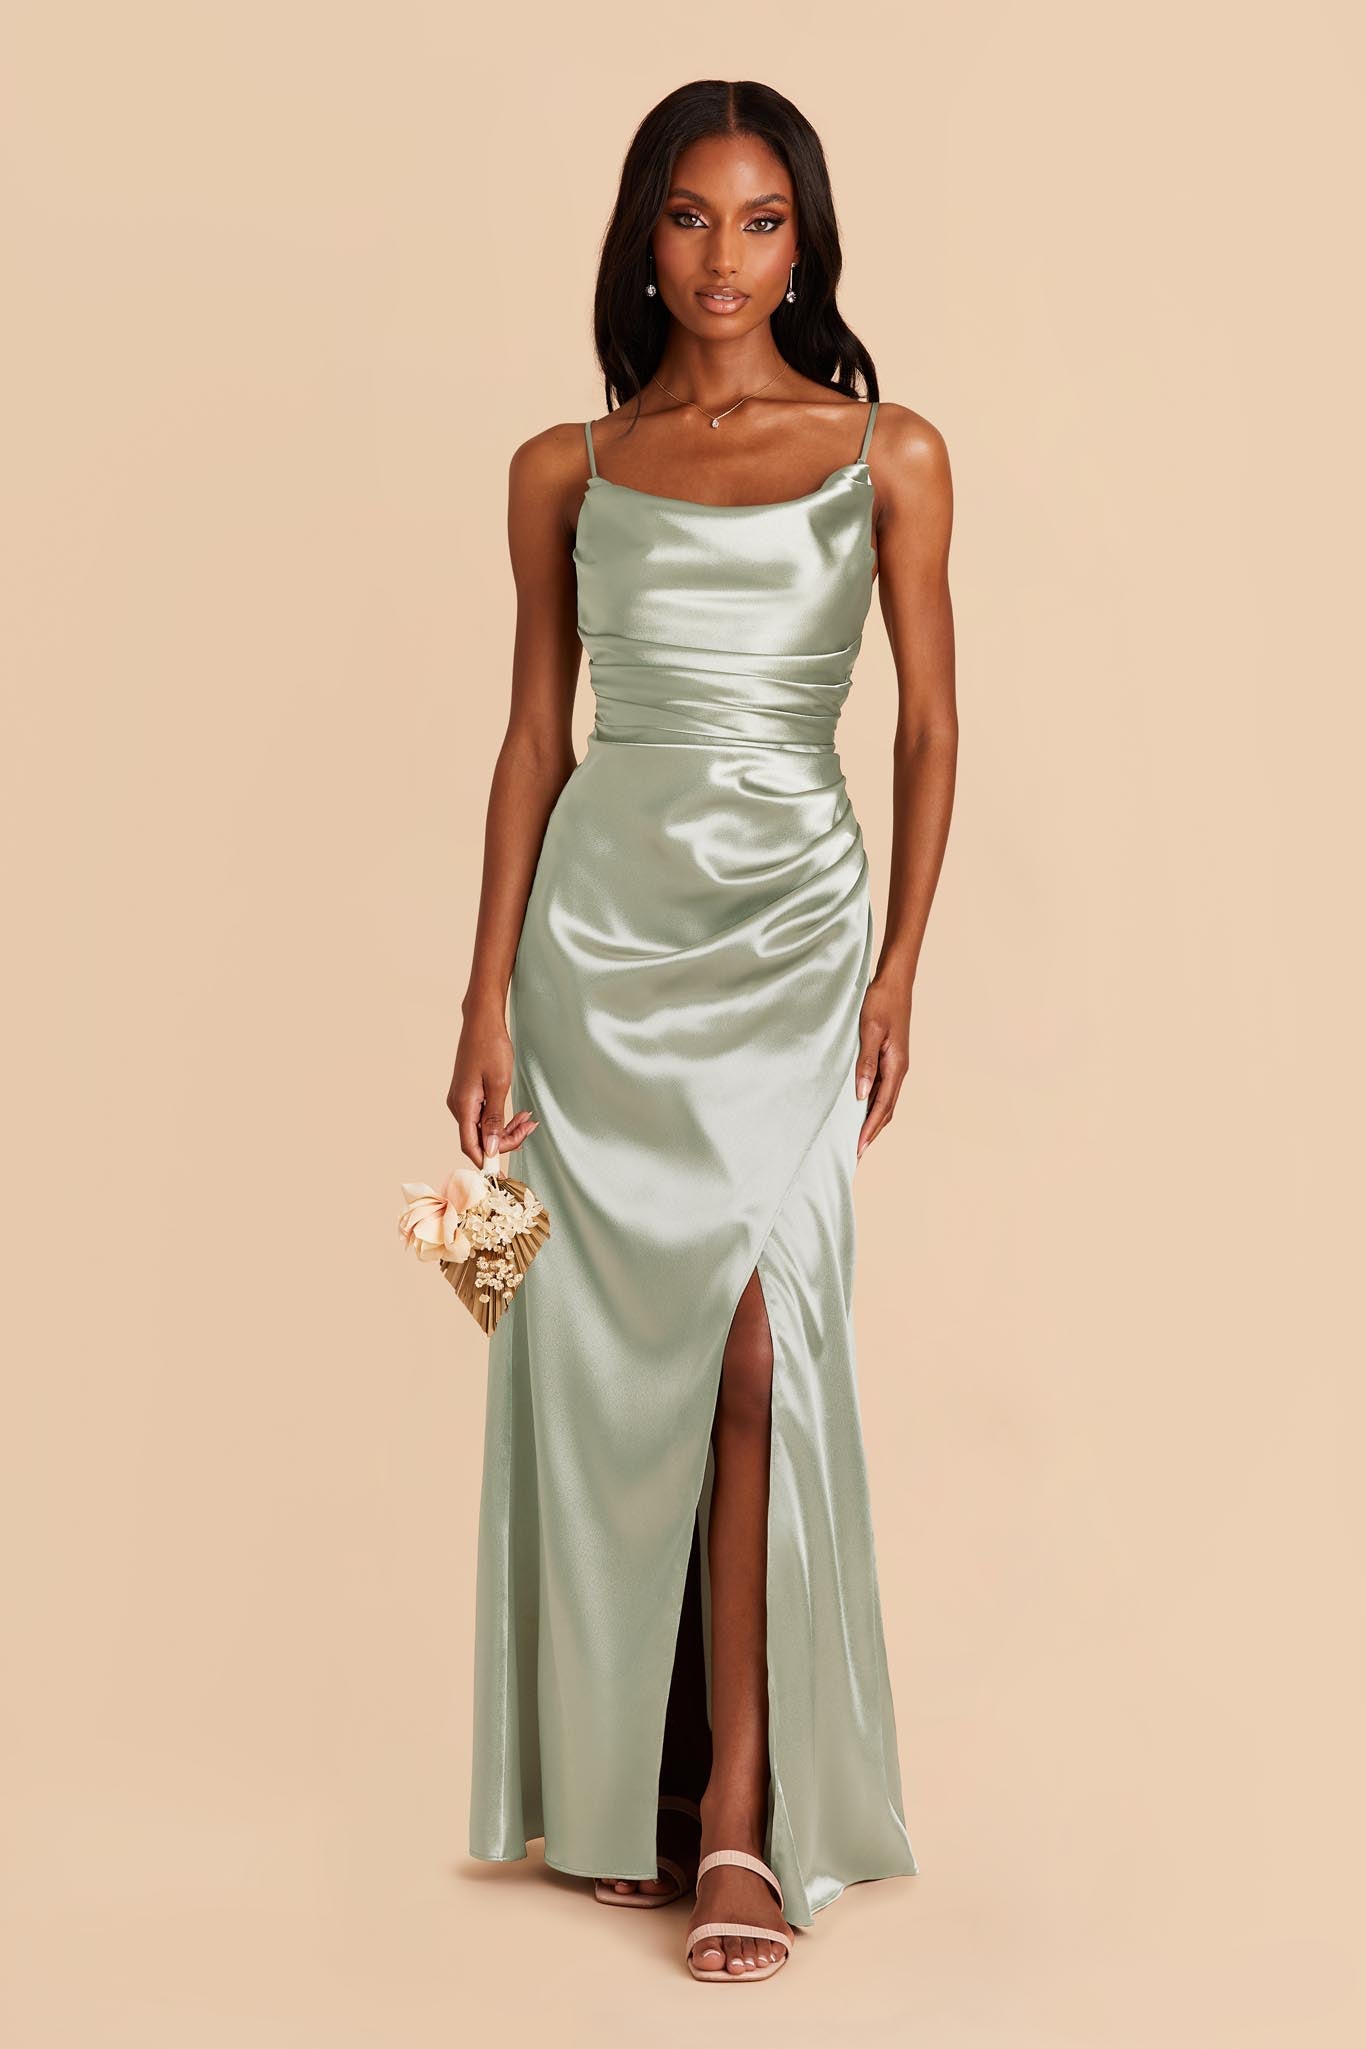 Silver Sage Bridesmaid Dress at Revelry | Velvet Fabric by Yard | Made to Order Silver Sage